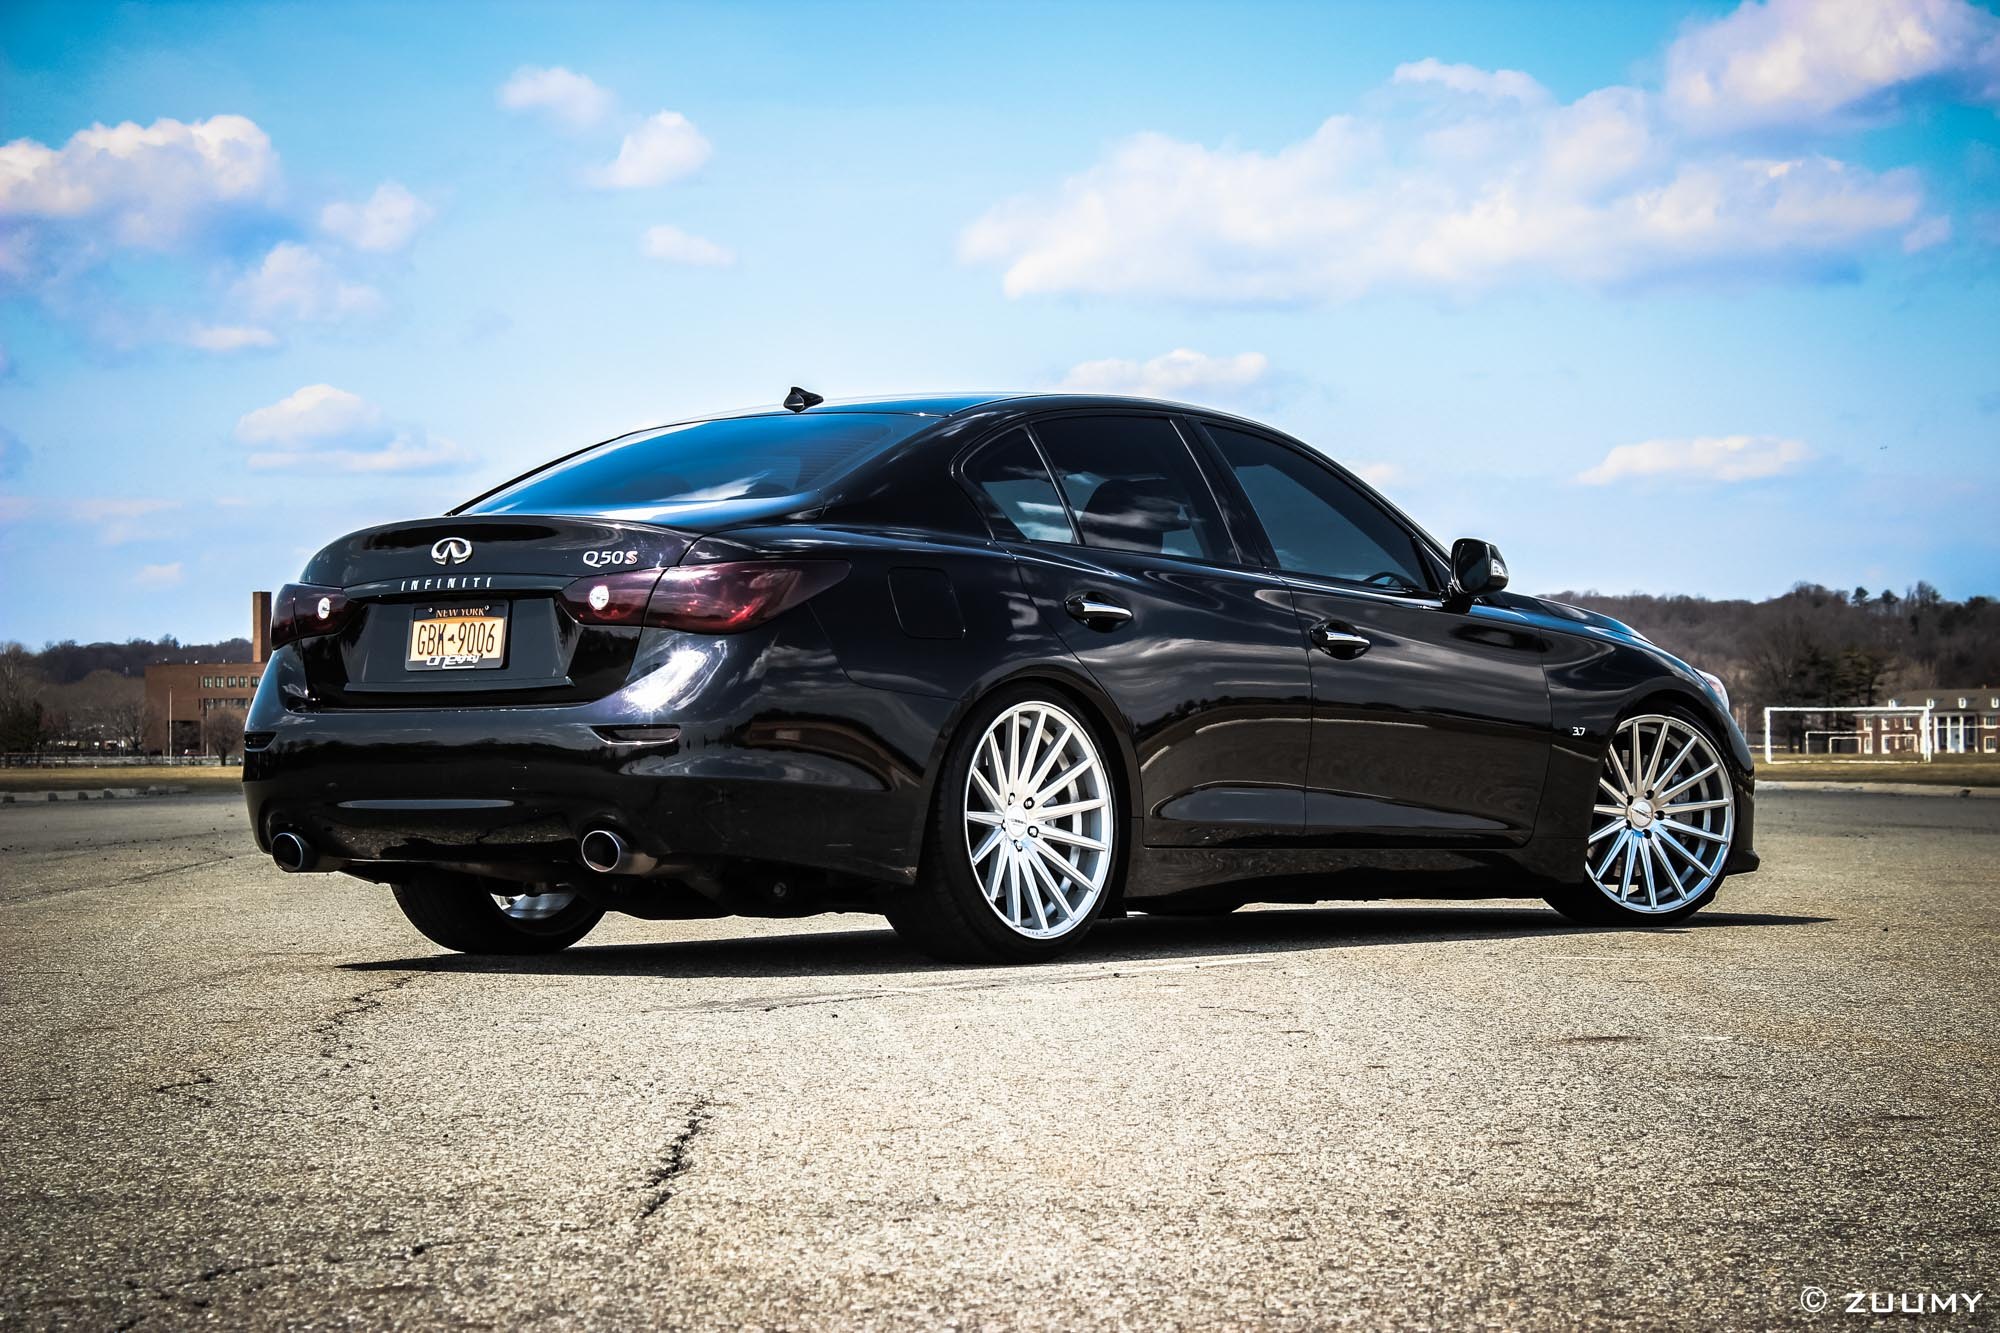 Aftermarket LED Taillights on Gloss Black Infiniti Q50 S - Photo by Vossen